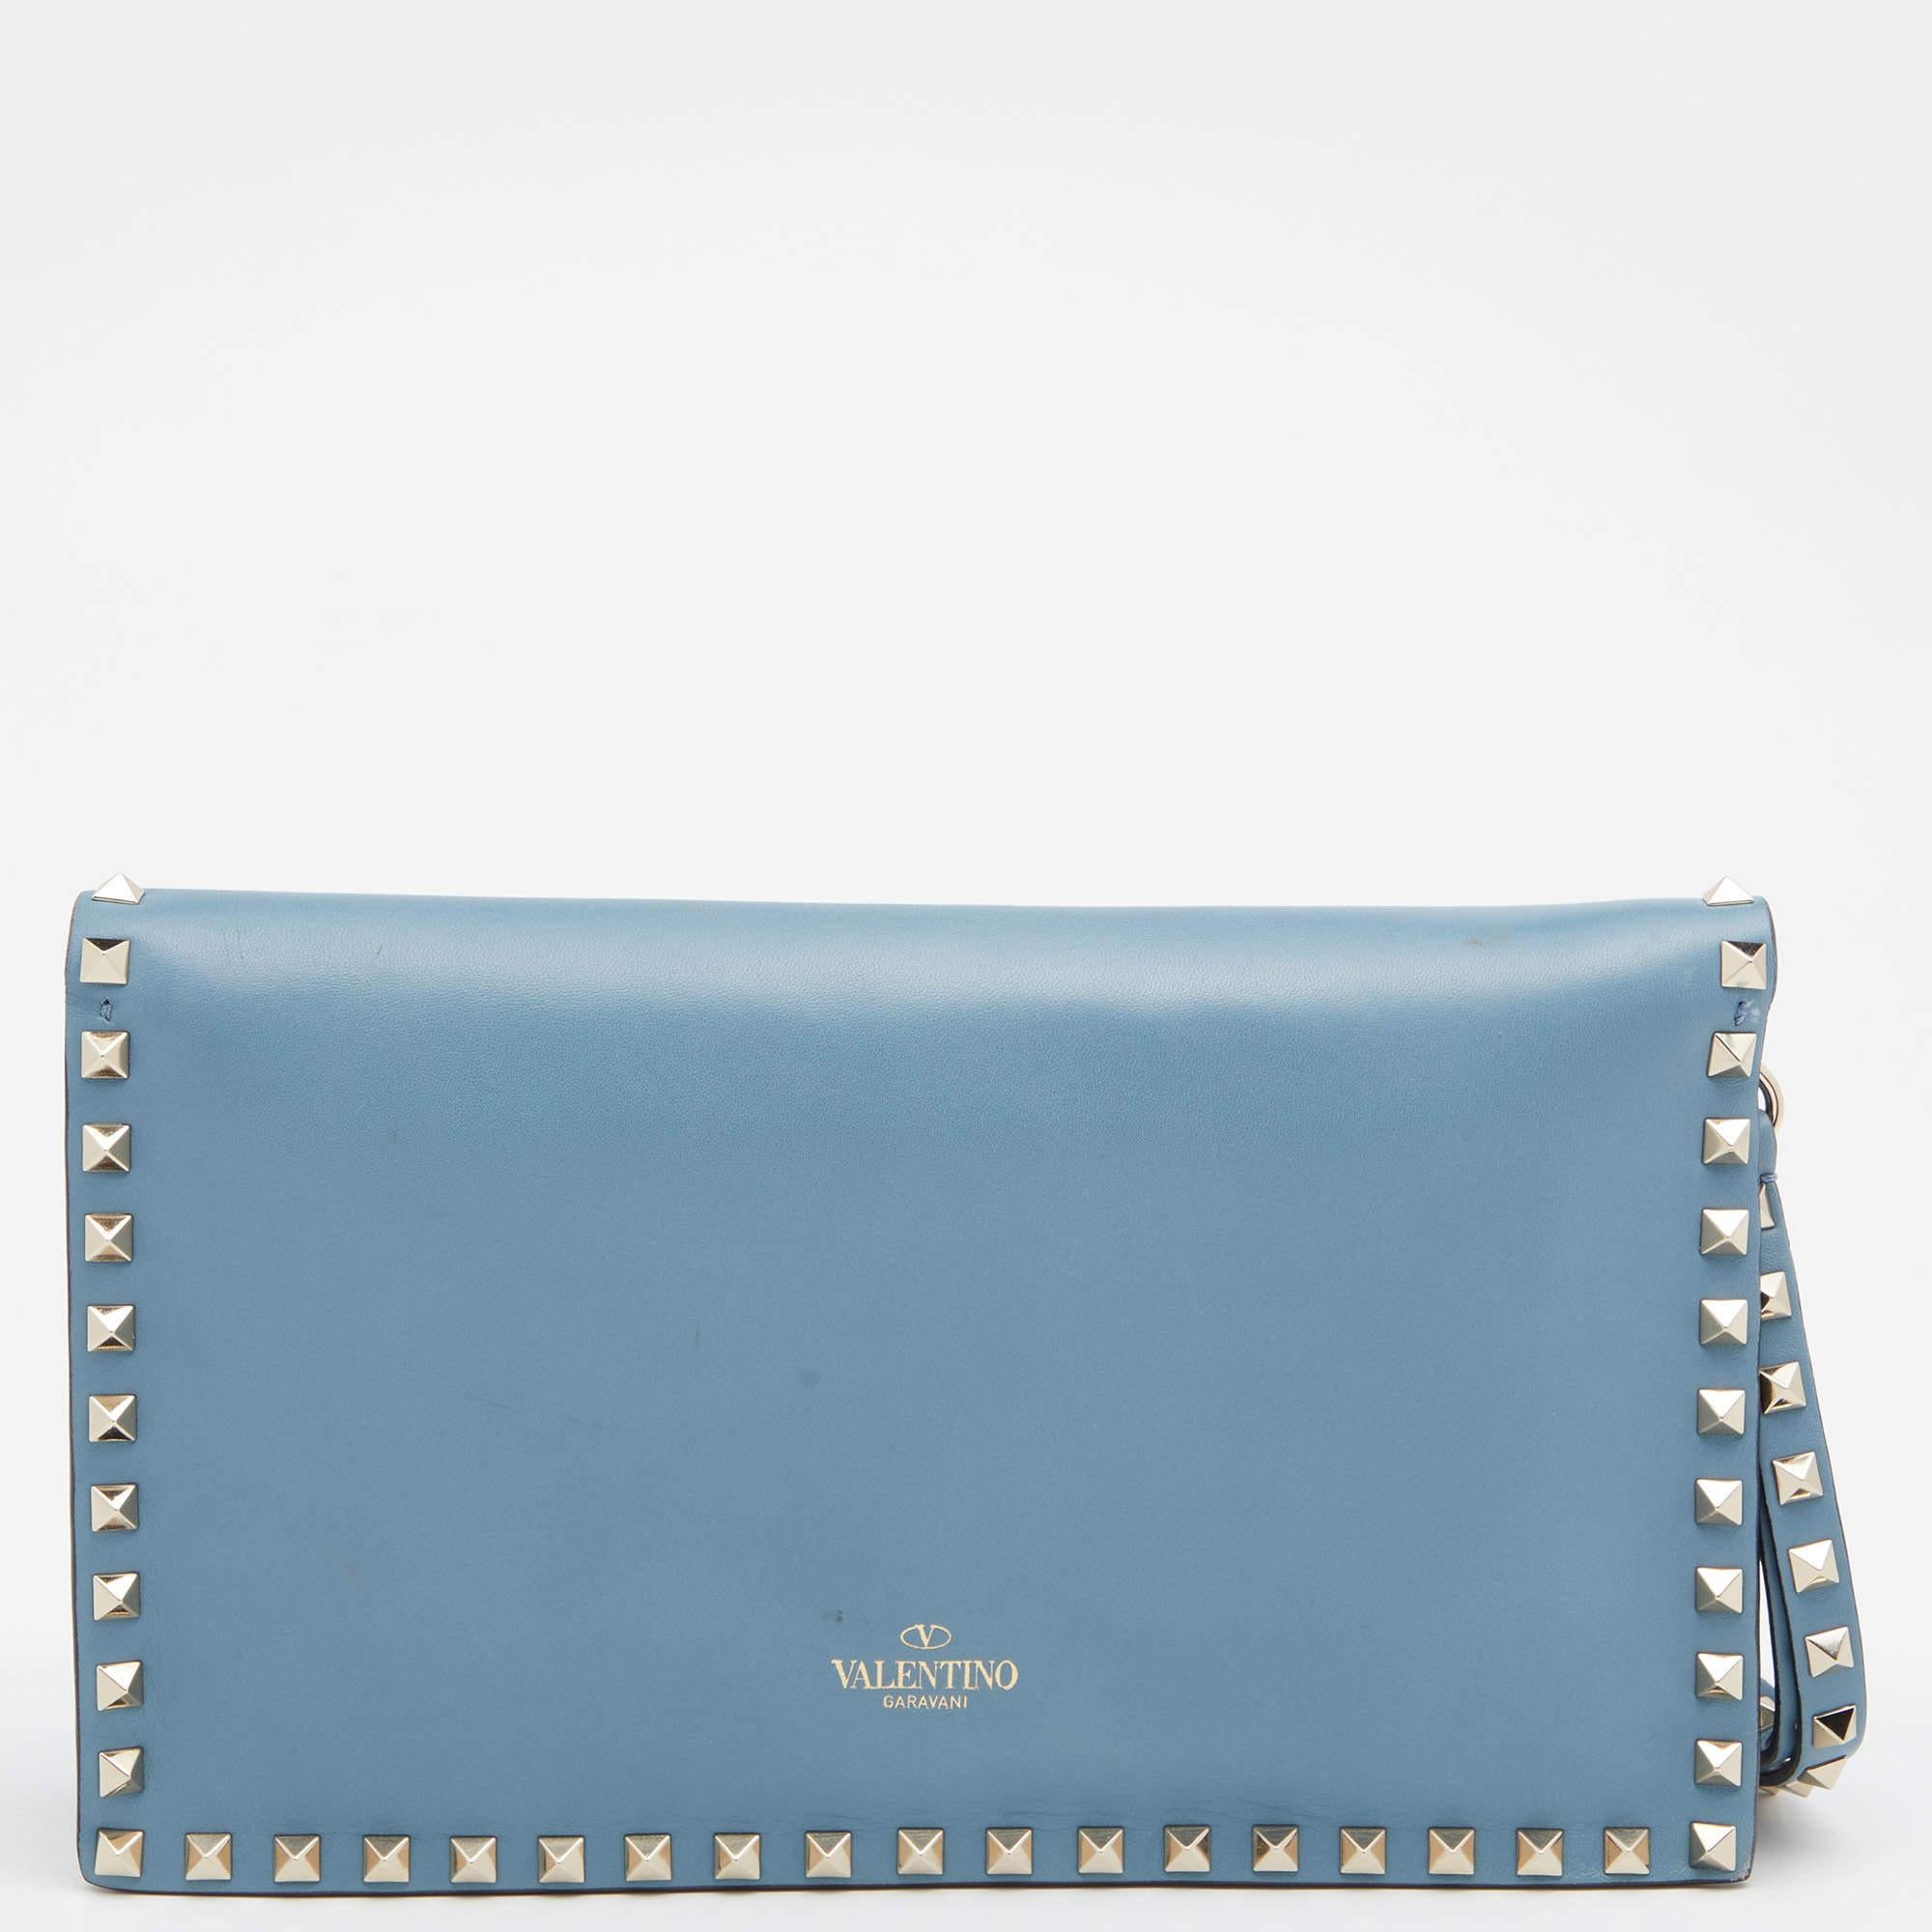 This Valentino clutch is a statement piece to add to your closet. Designed to deliver effortless style, it is crafted in Italy from quality leather. It comes in a lovely shade of sky blue and is accented with the brand's signature Rockstuds on the